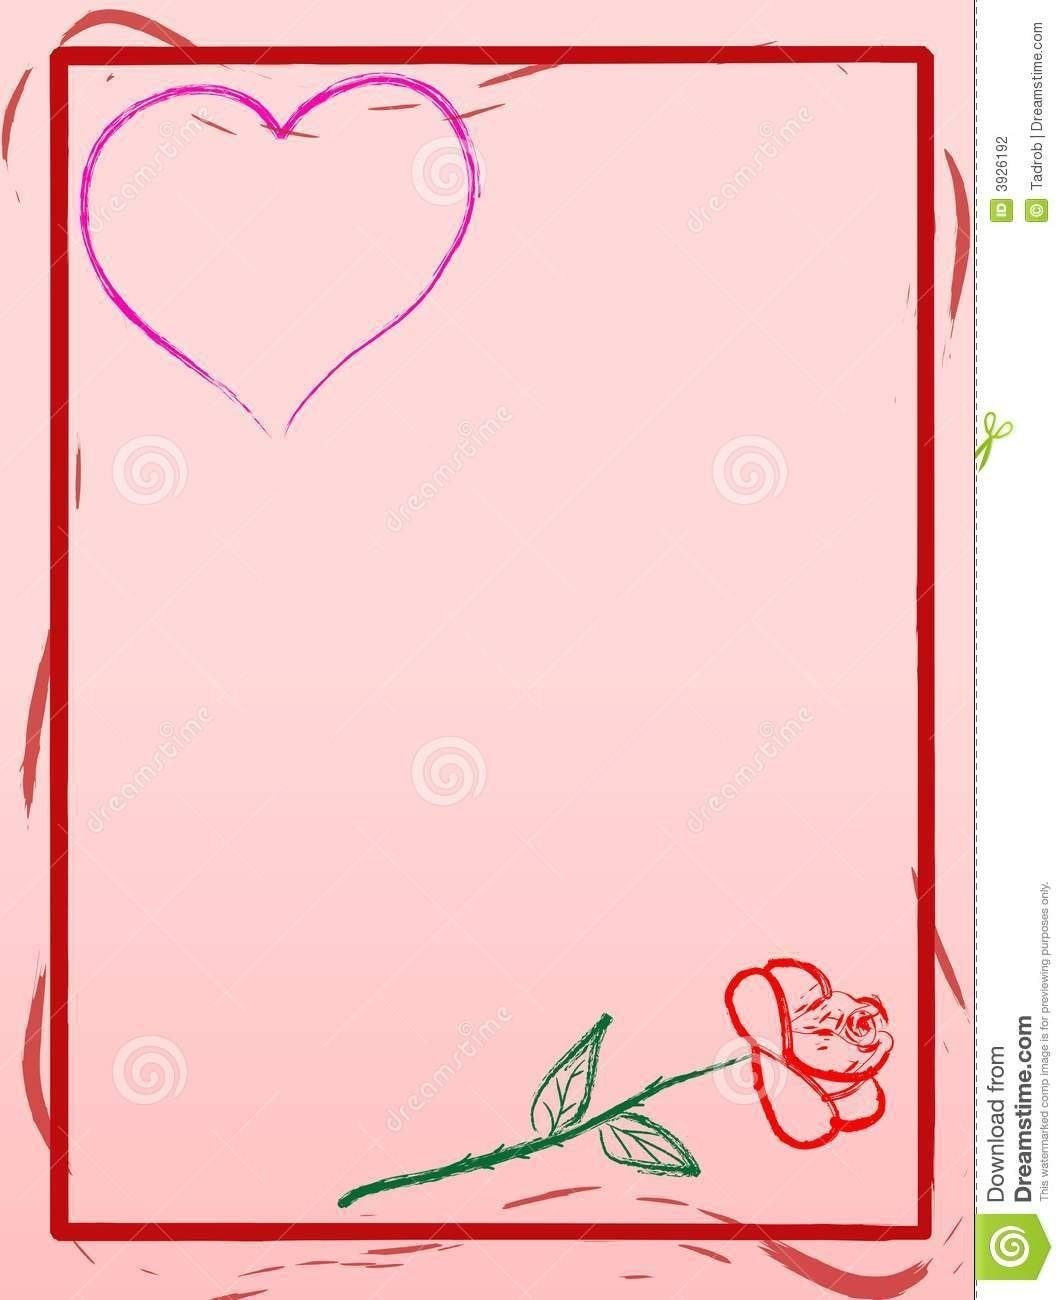 Love Letter Background Template  Theveliger with Template For Love Letter